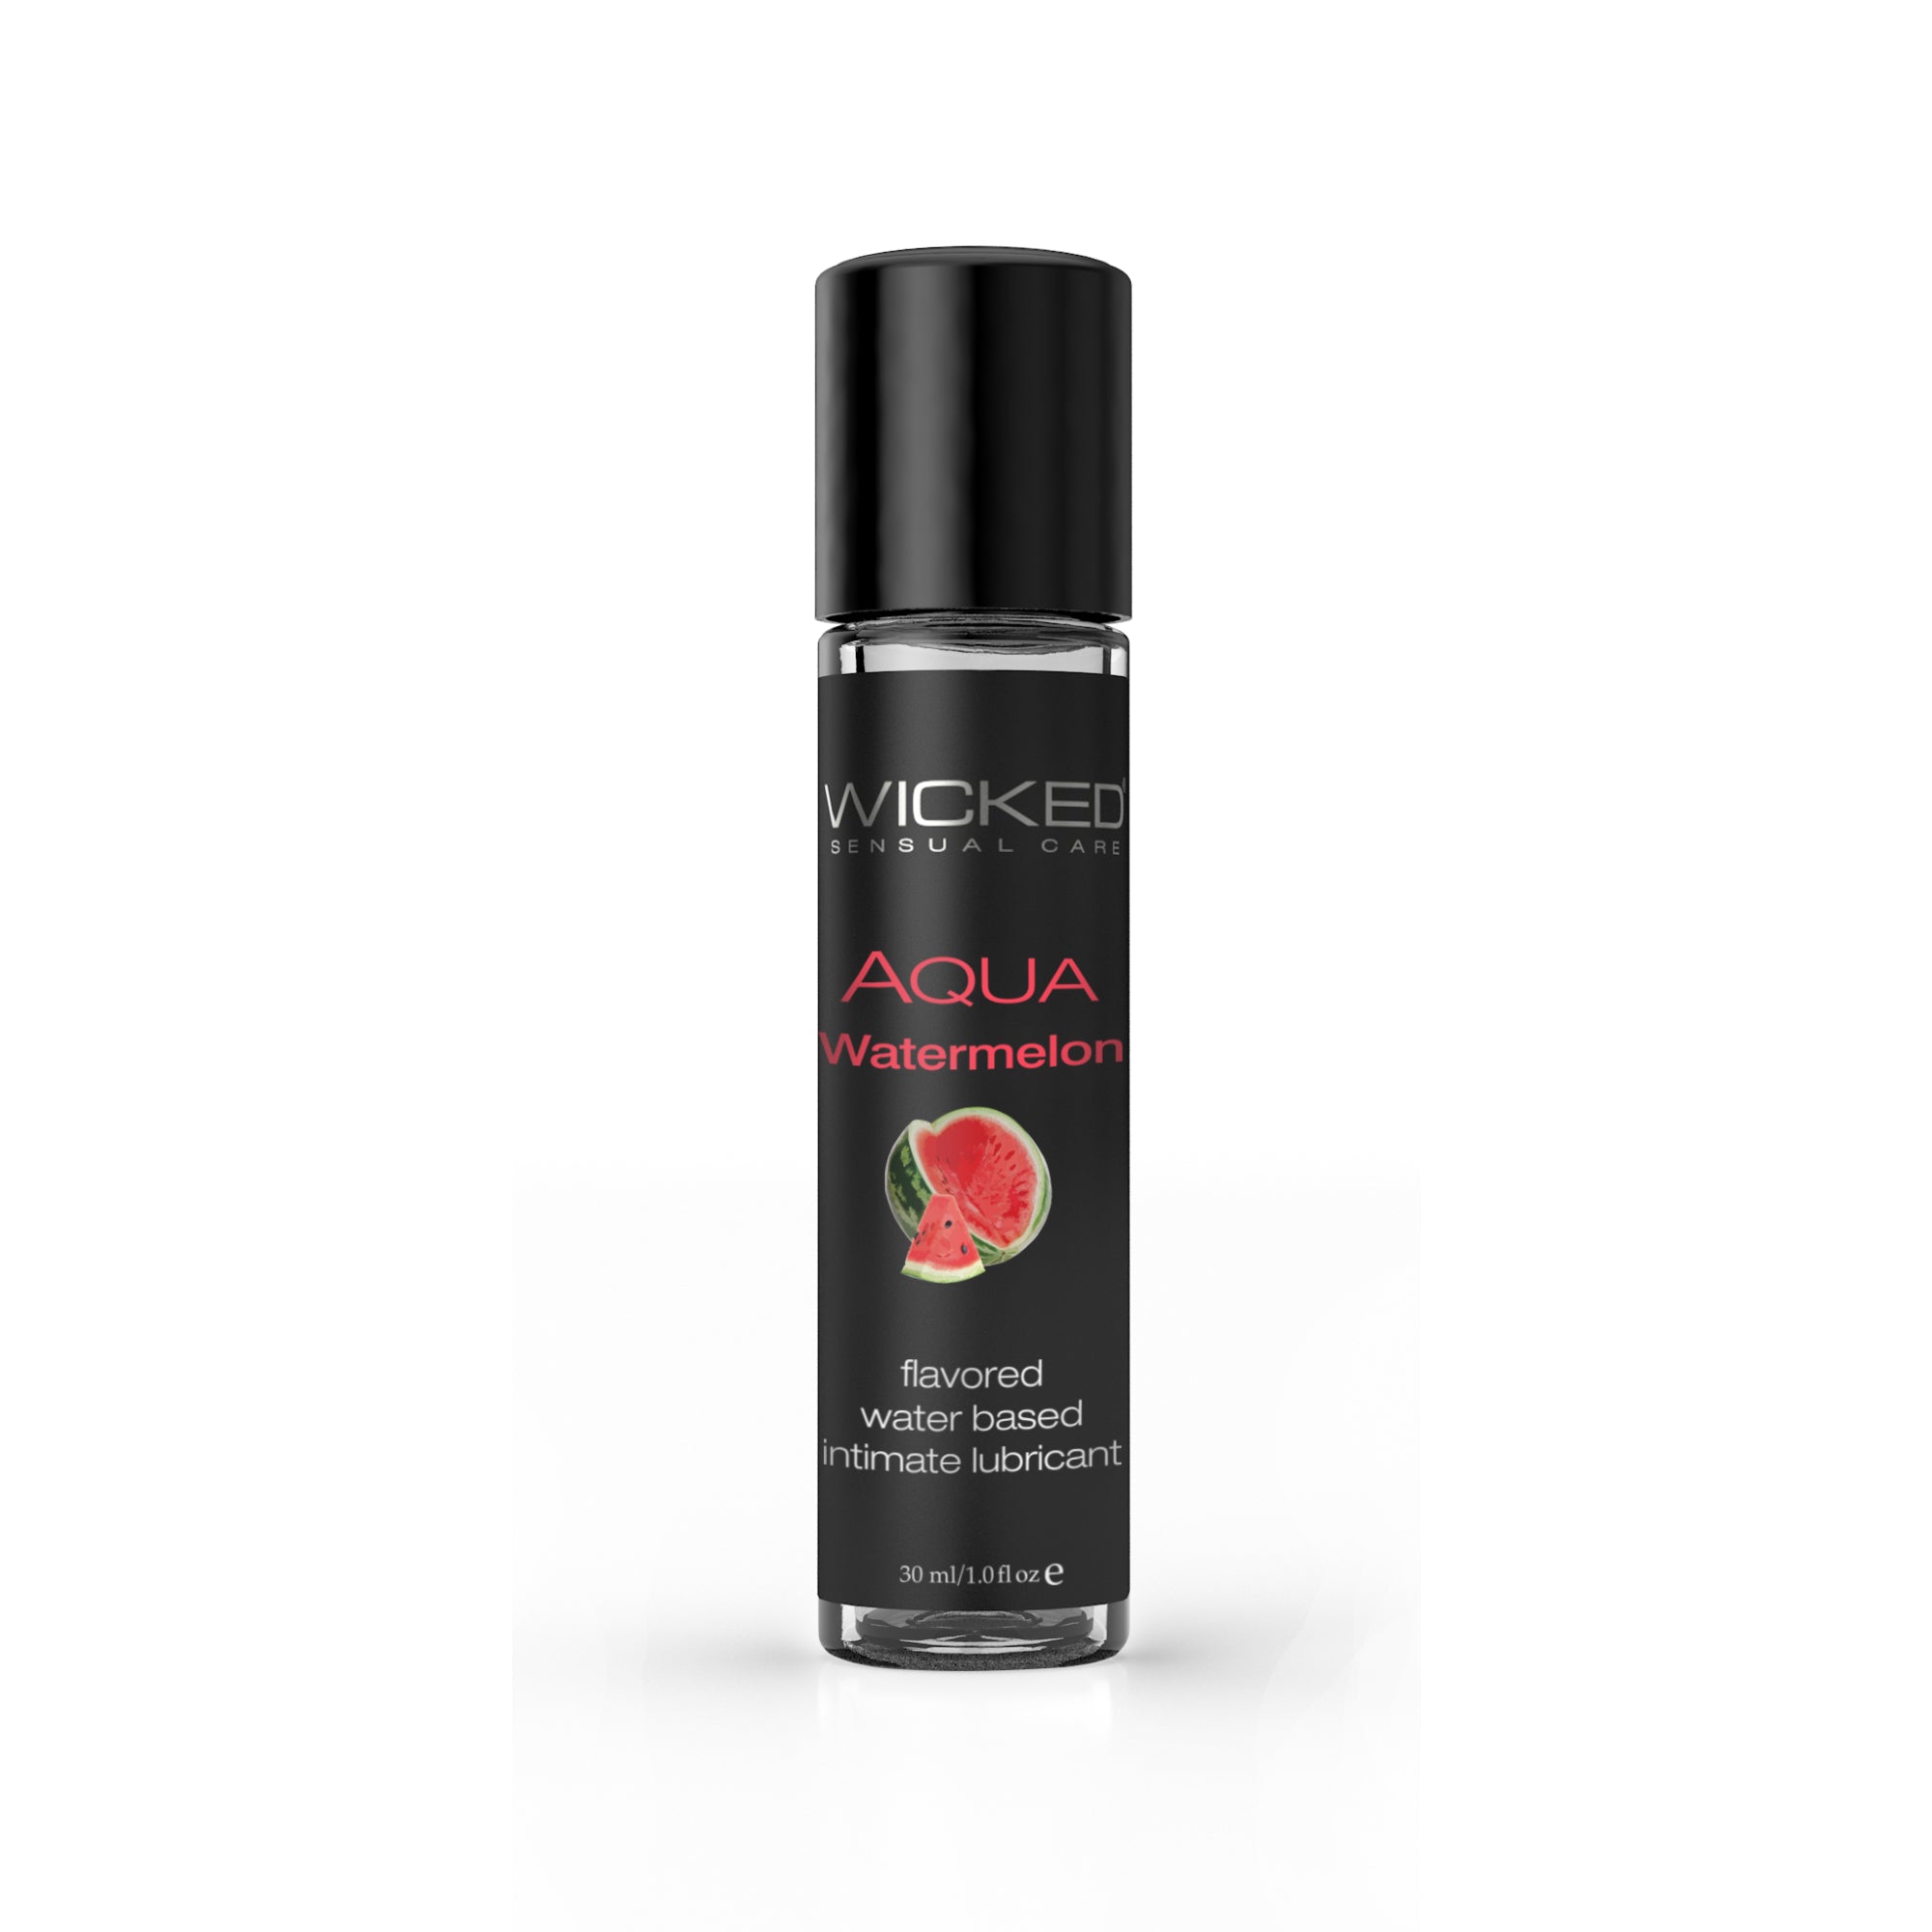 Wicked Sensual Care Watermelon Flavored Water Based Intimate Lubricant